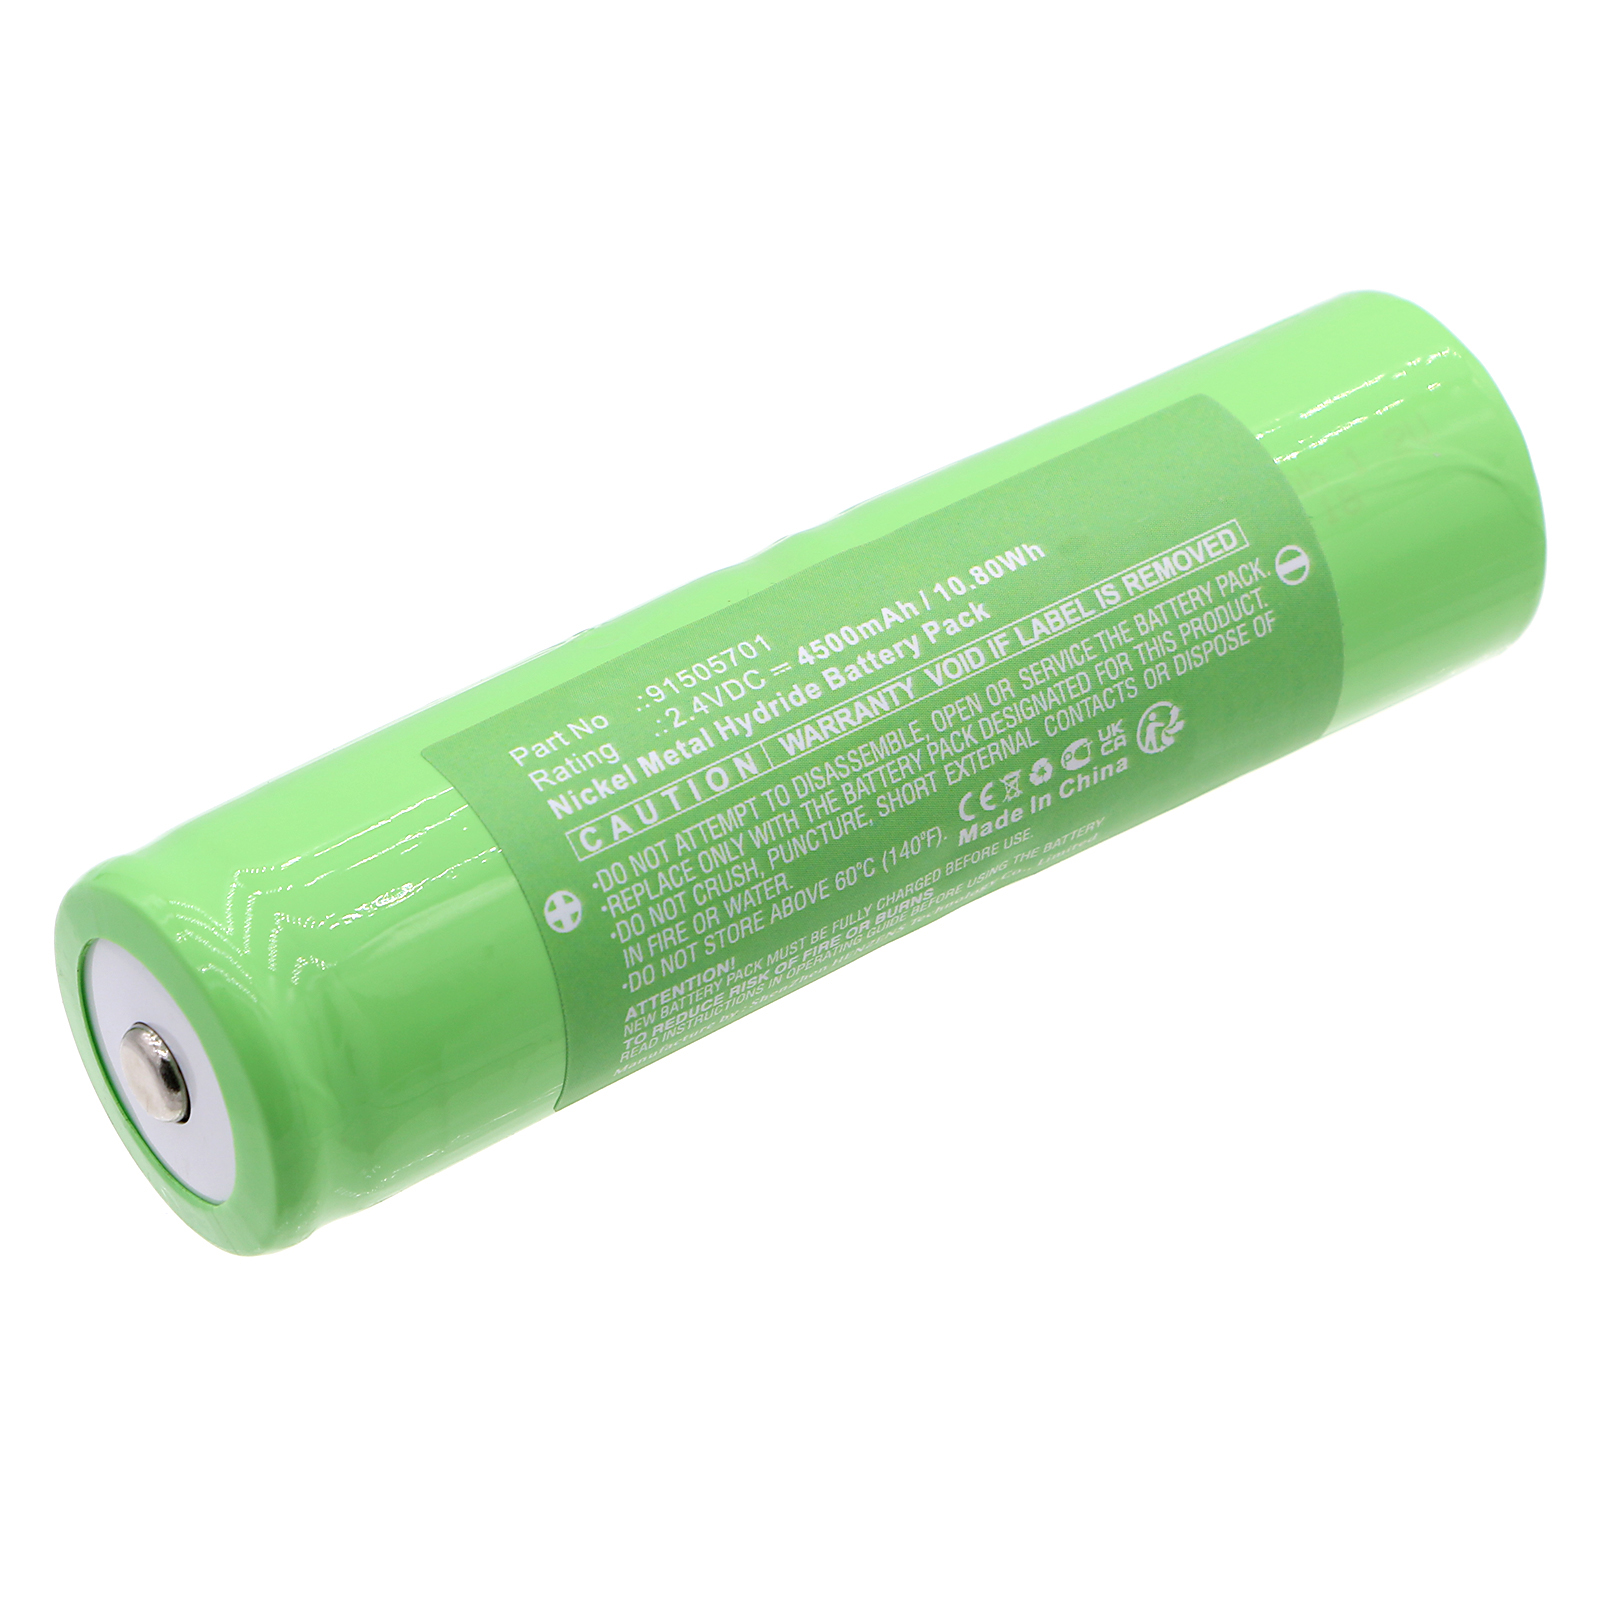 Synergy Digital Equipment Battery, Compatible with Leica 91505701 Equipment Battery (Ni-MH, 2.4V, 4500mAh)